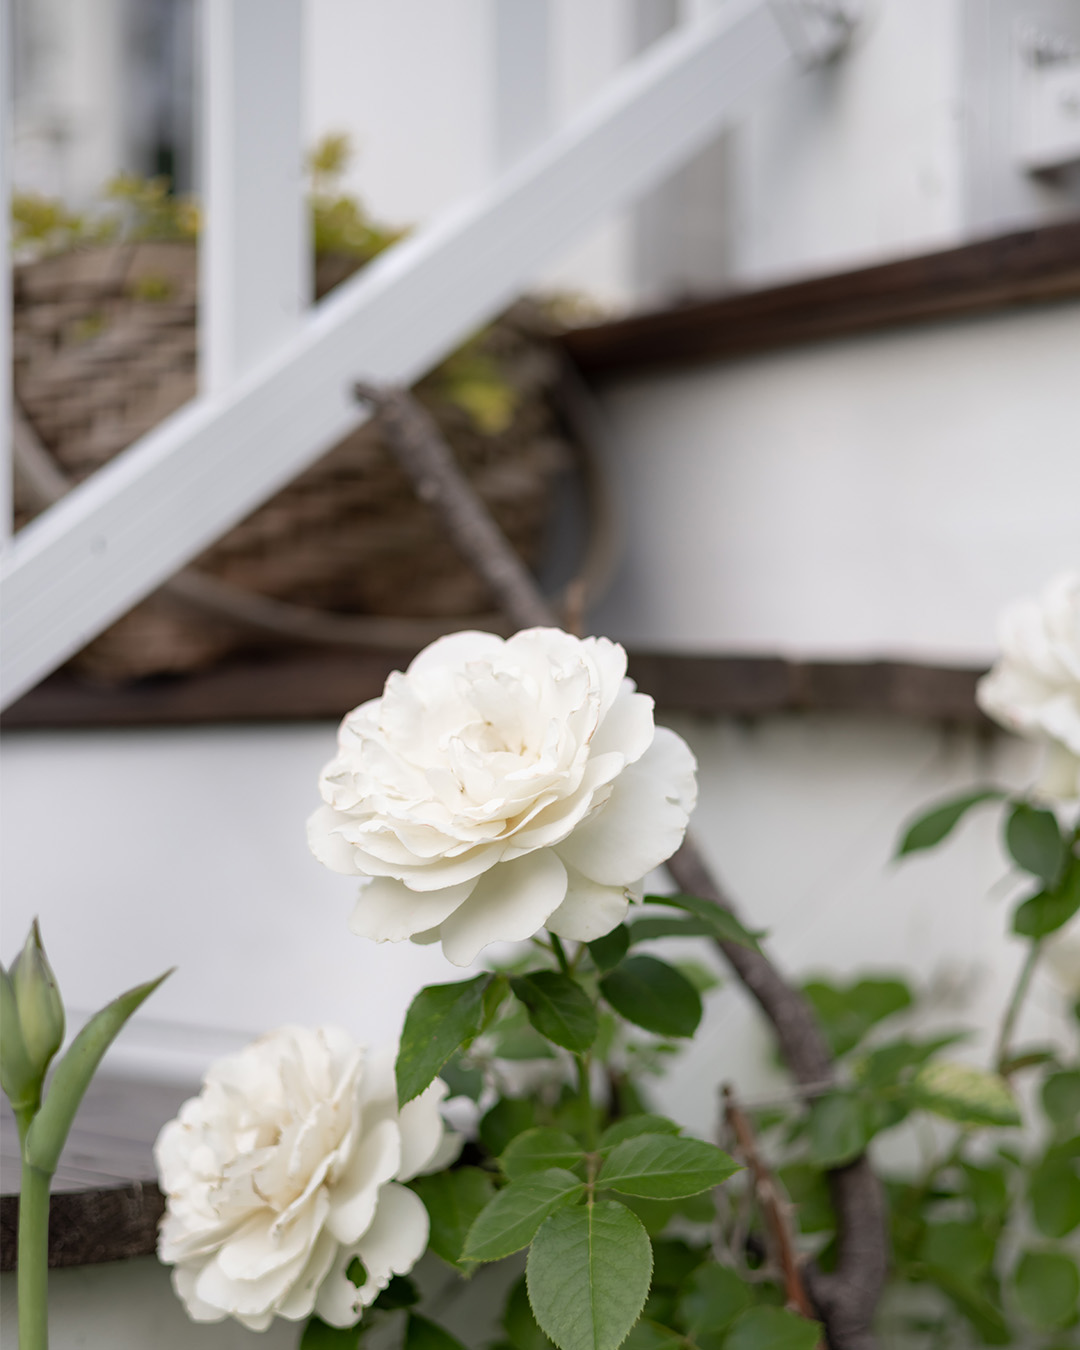 A climbing rose growing next to a stair railing.